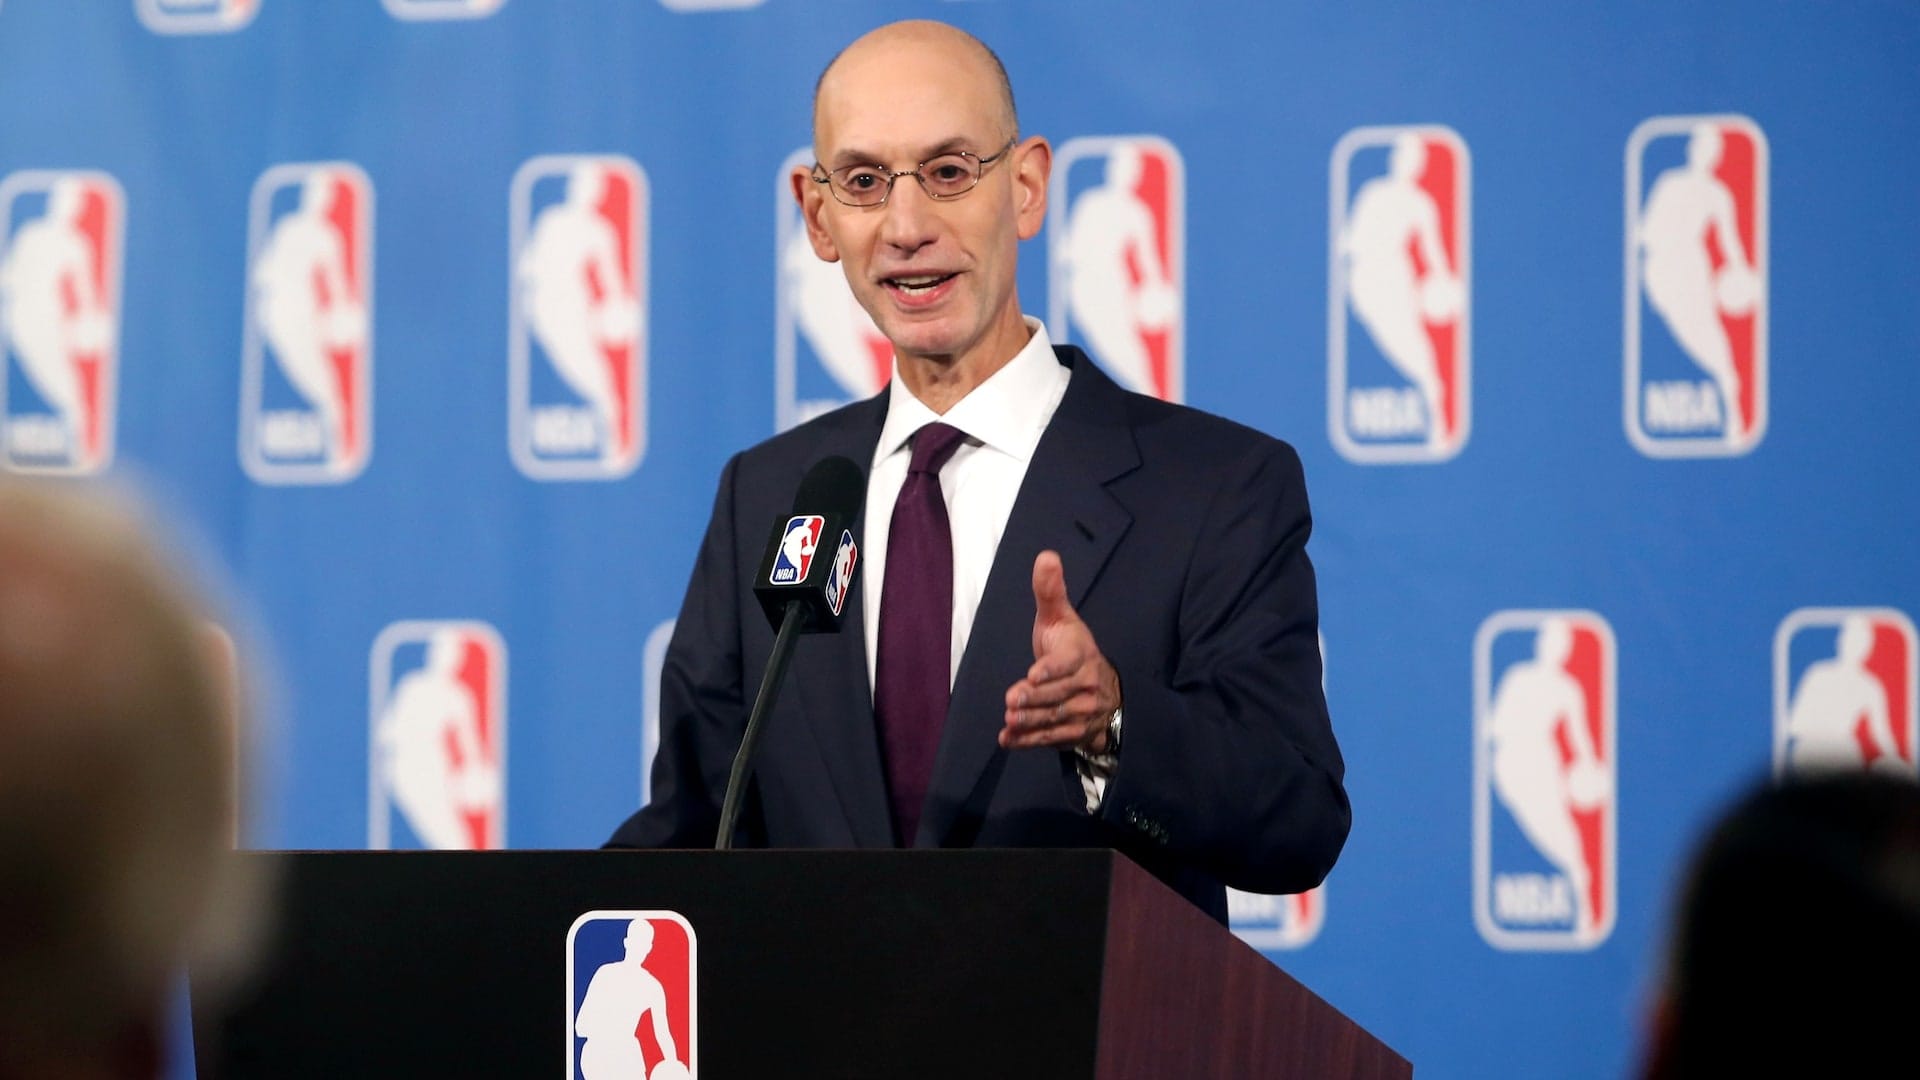 NBA Faces Complex Negotiations as Warner Bros. Network Deal Nears End